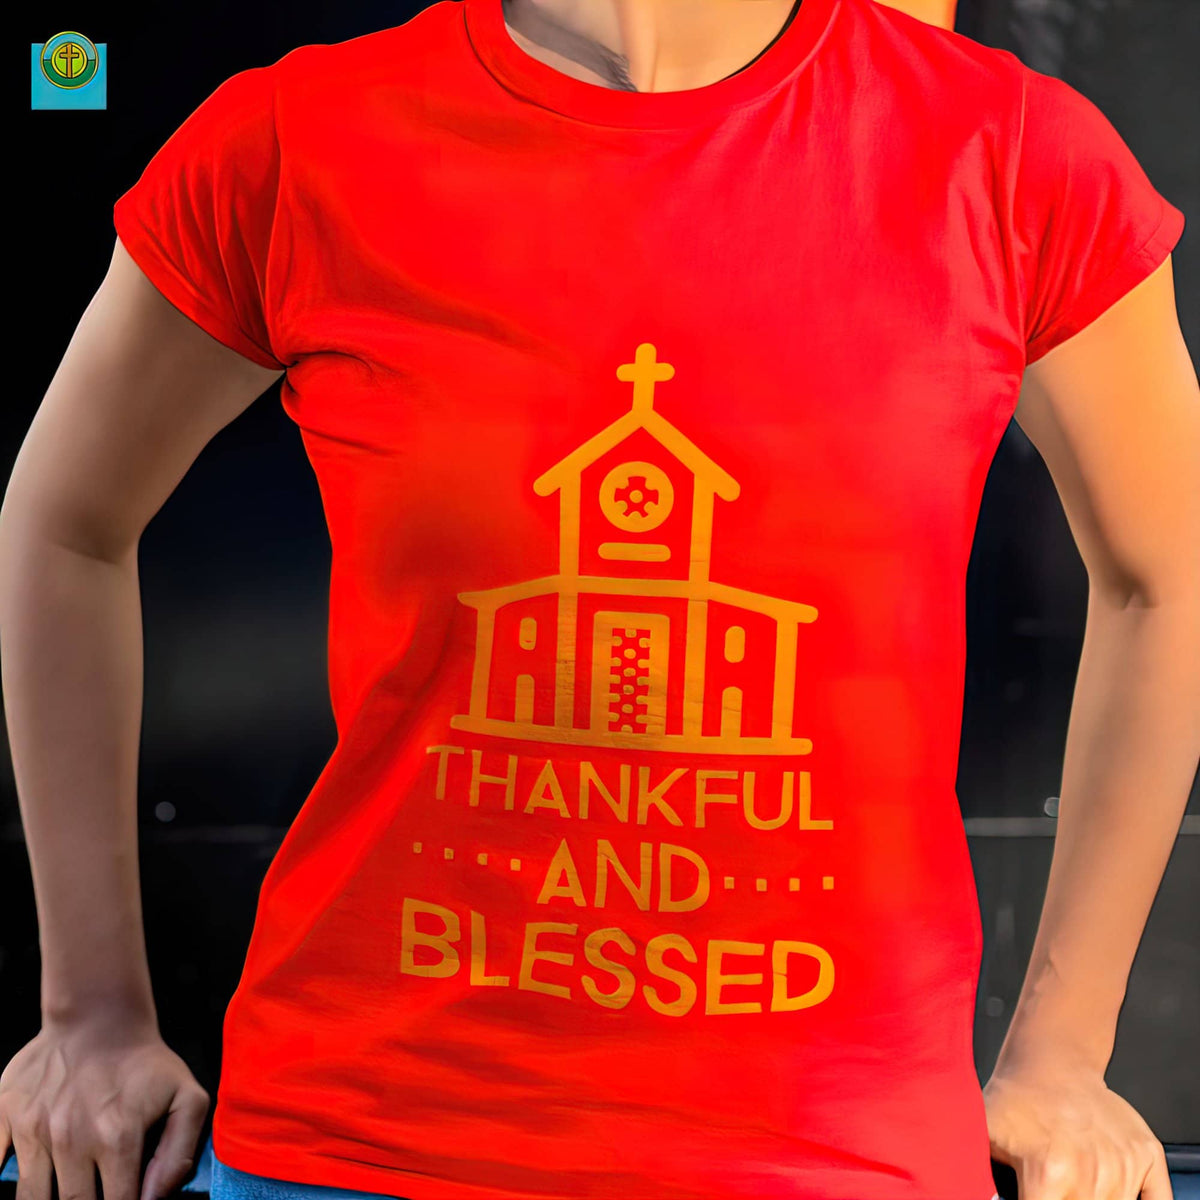 Bella &amp; Canvas Ladies Favorite T-Shirt &quot;Thankful and Blessed&quot;